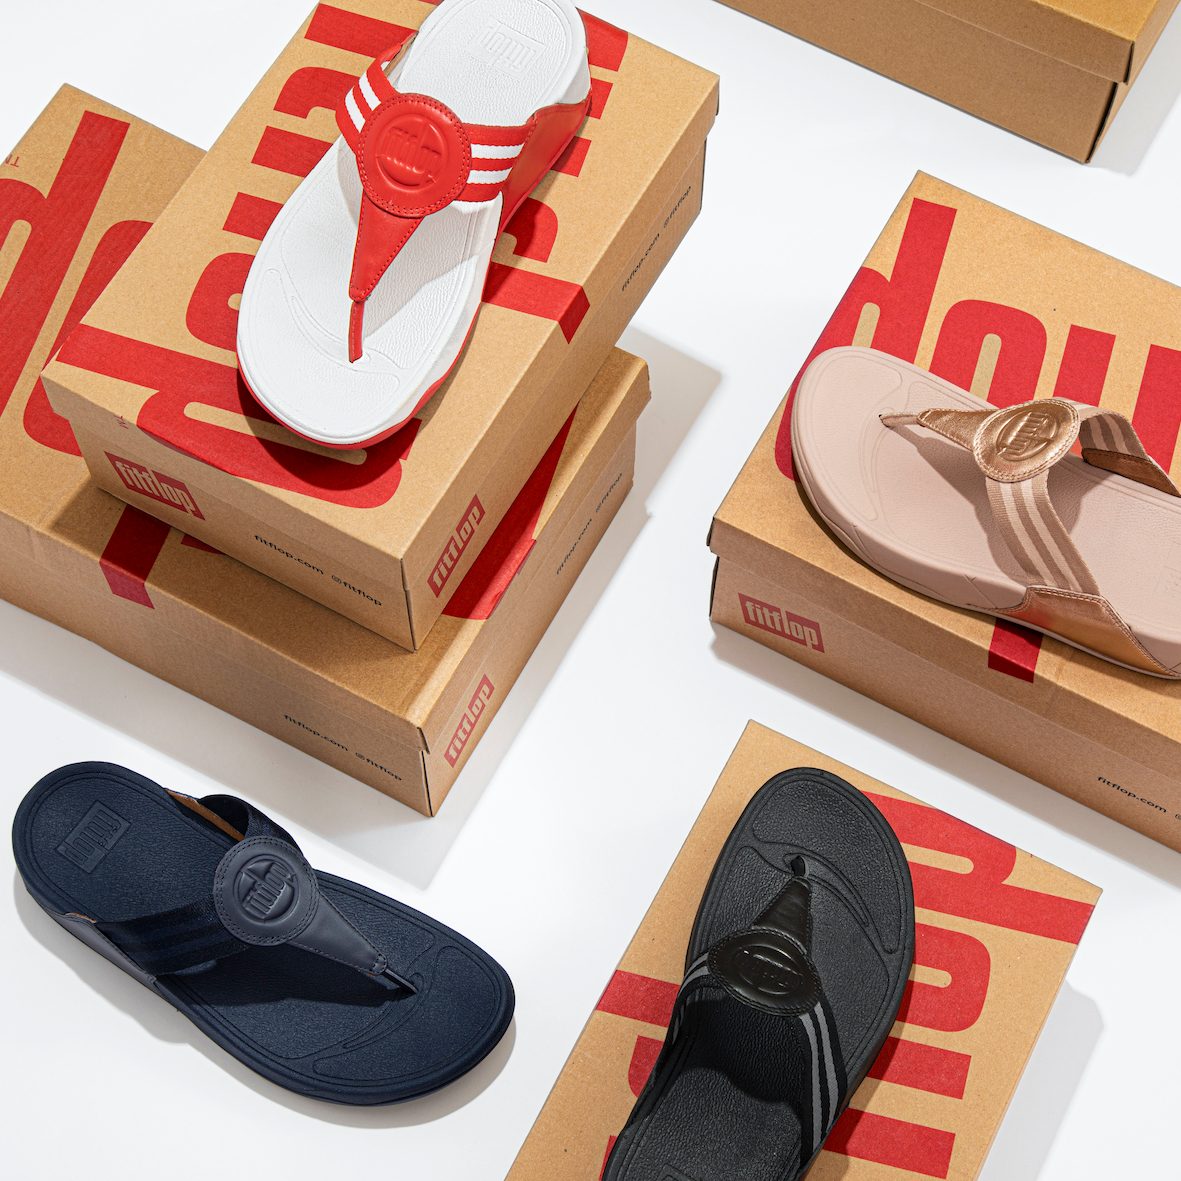 FitFlop to reopen in the Philippines by October 2021